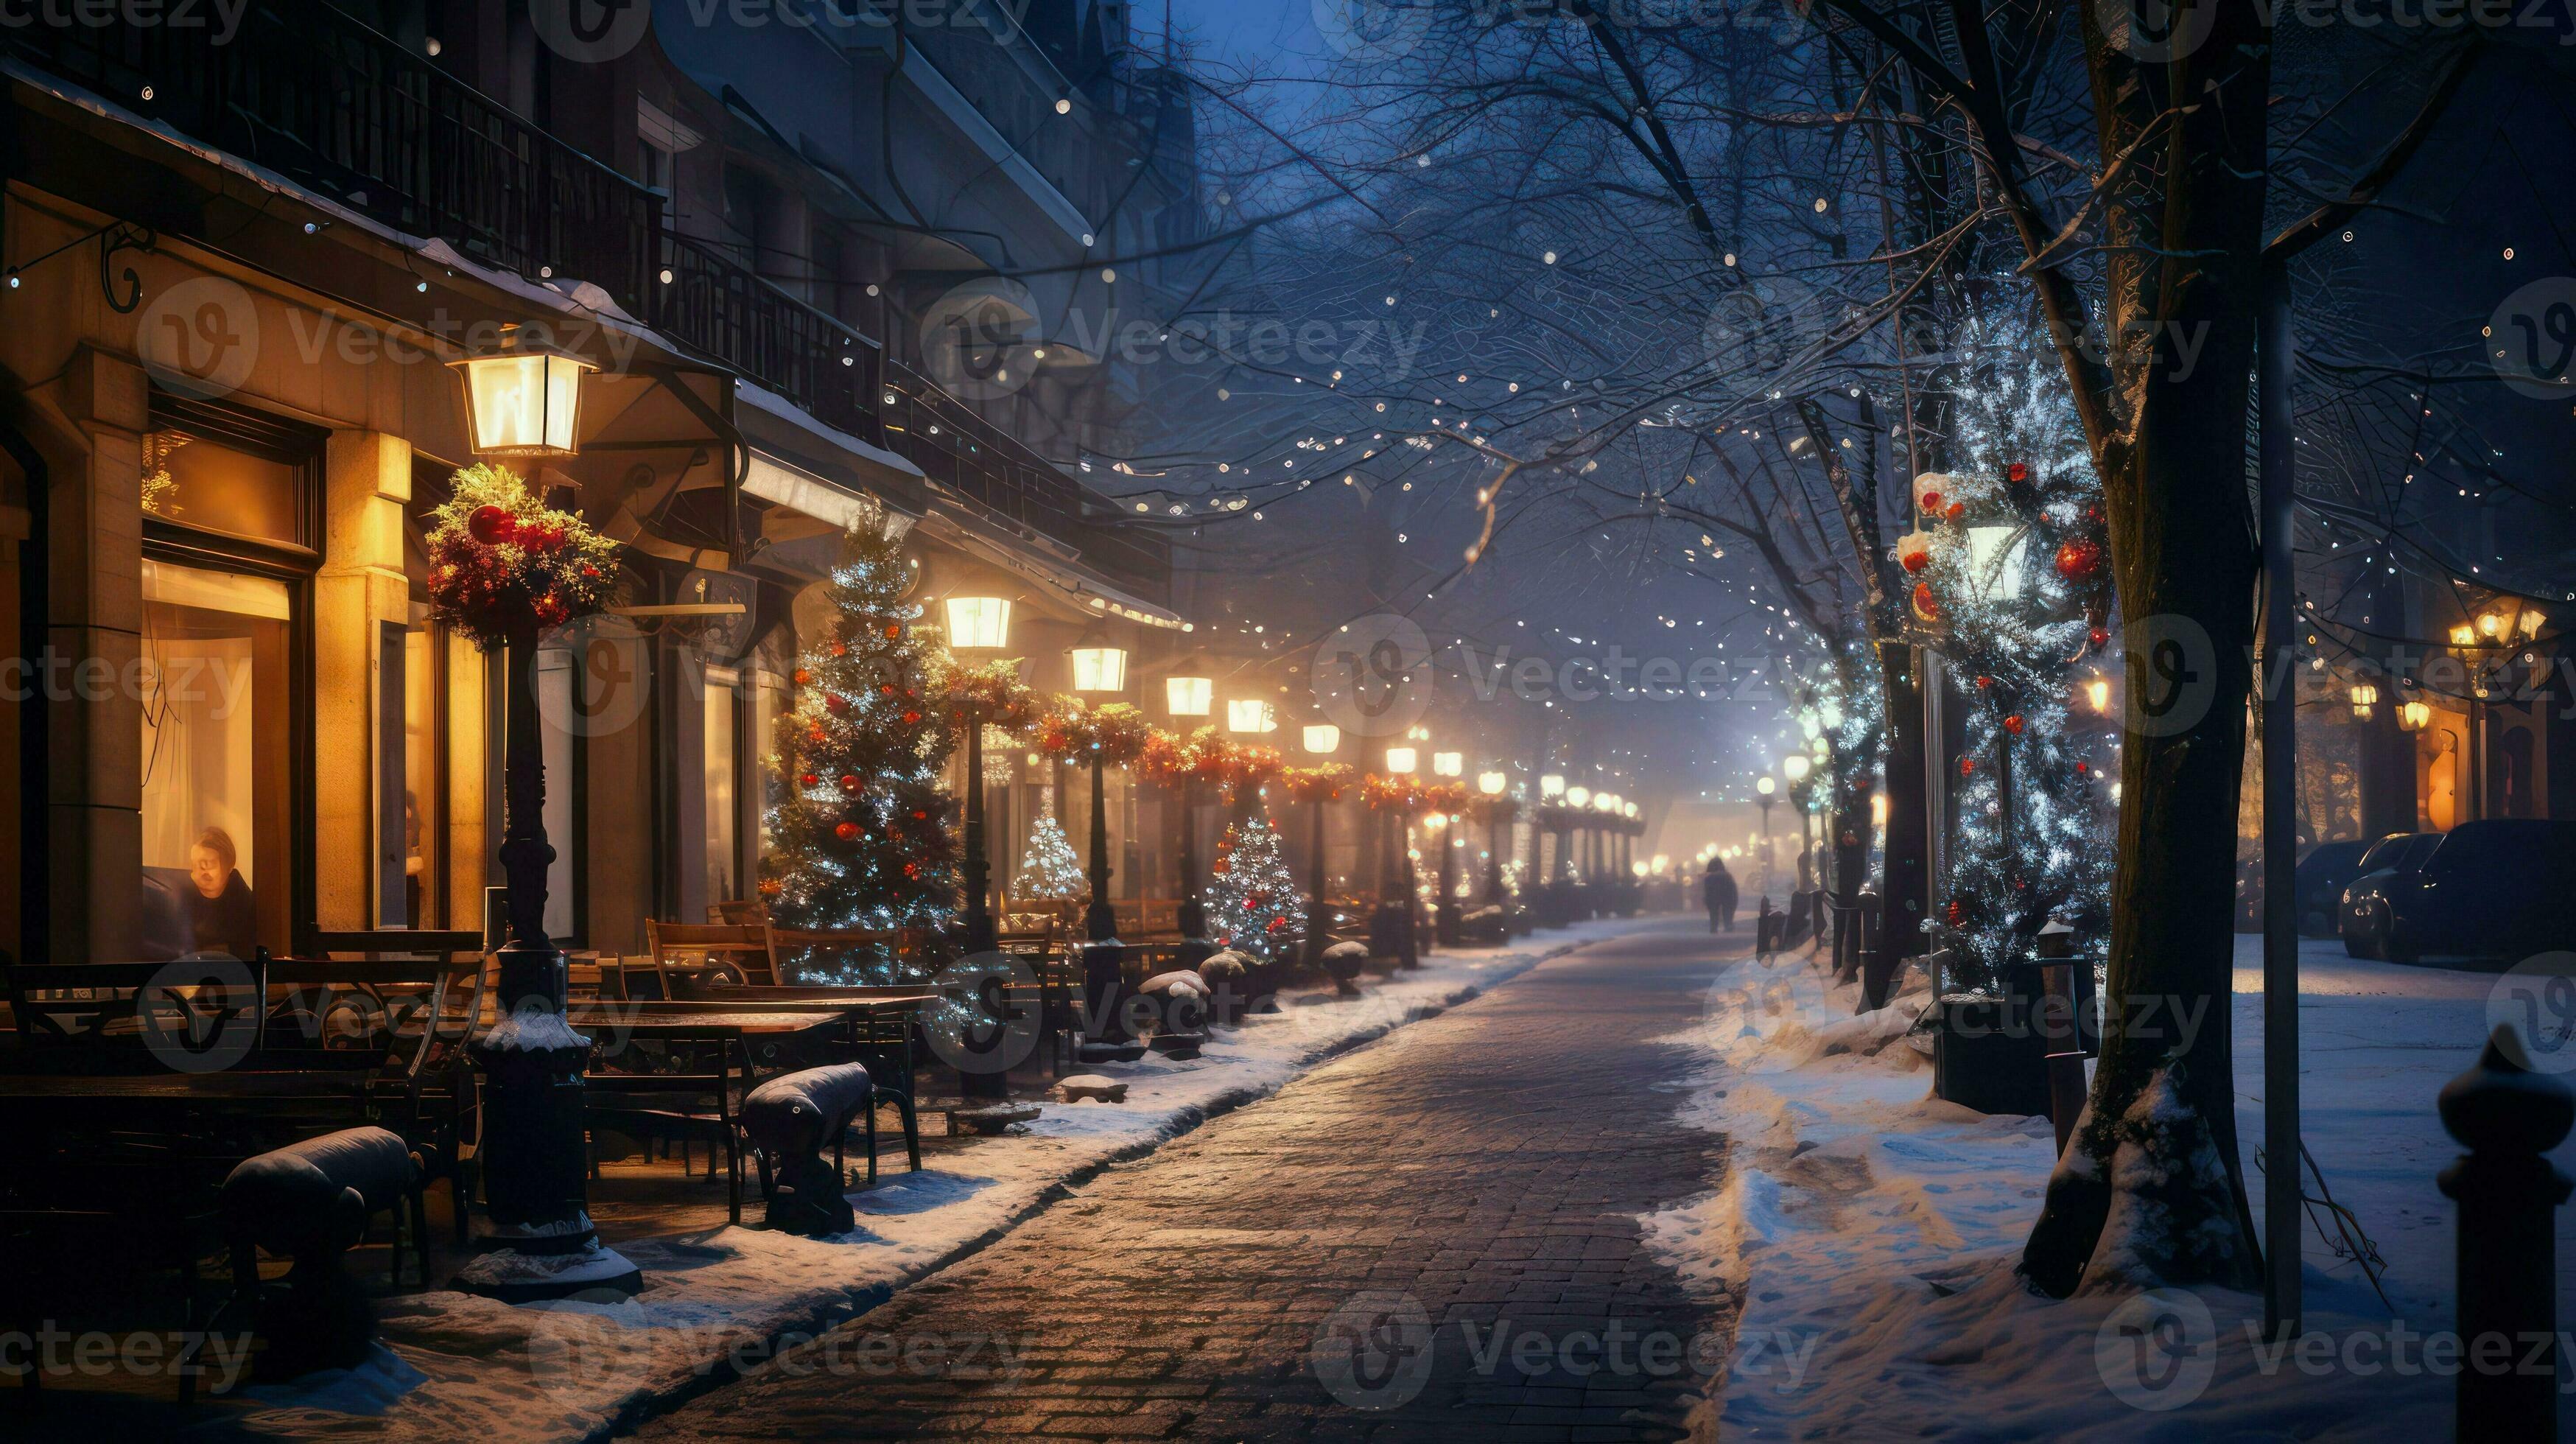 Winter city street at night with street lamps and trees covered with snow  30250922 Stock Photo at Vecteezy